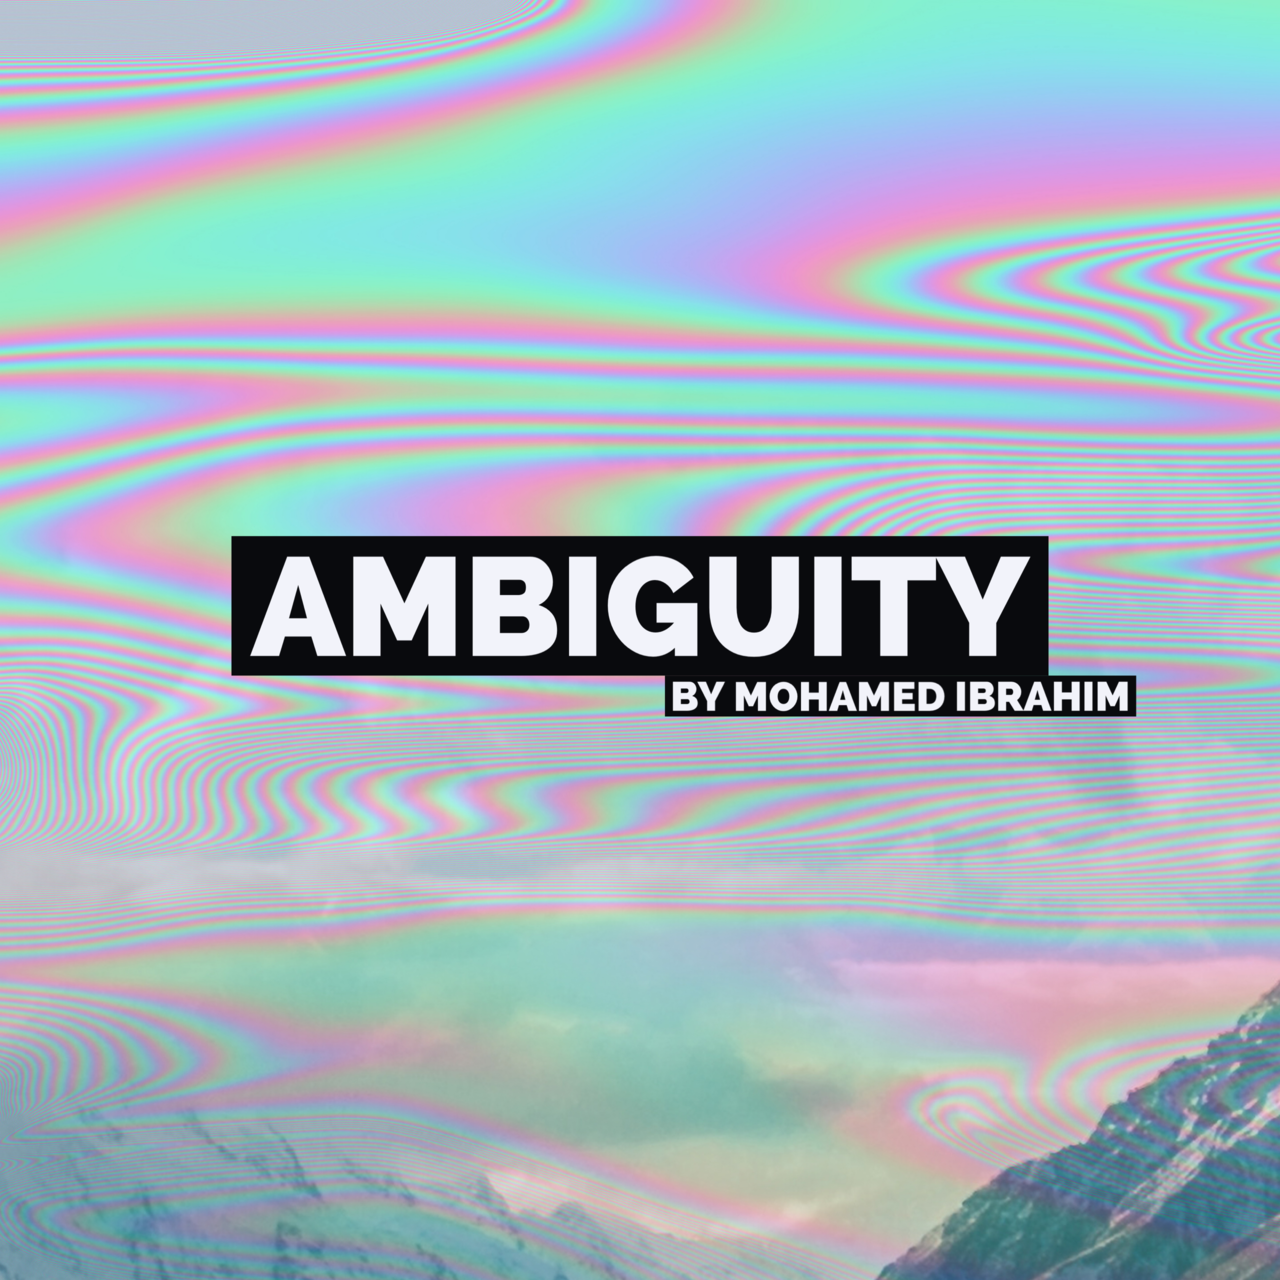 Ambiguity by Mohamed Ibrahim (Mp4 Video + PDF Full Magic Download)